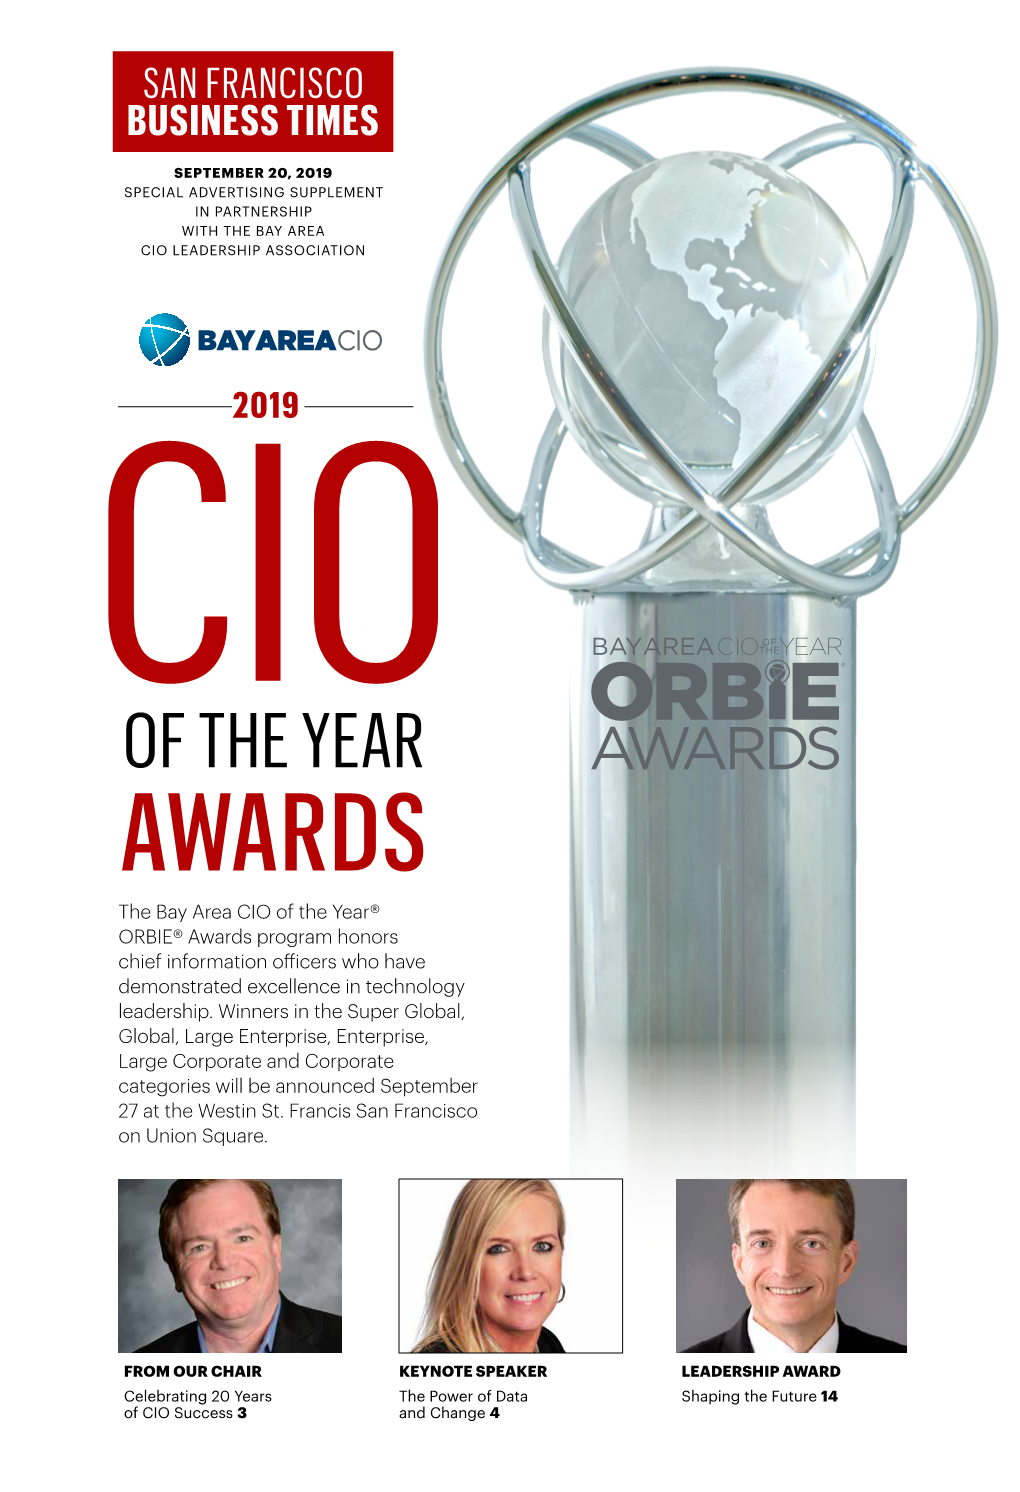 OF the YEAR AWARDS the Bay Area CIO of the Year® ORBIE® Awards Program Honors Chief Information Officers Who Have Demonstrated Excellence in Technology Leadership